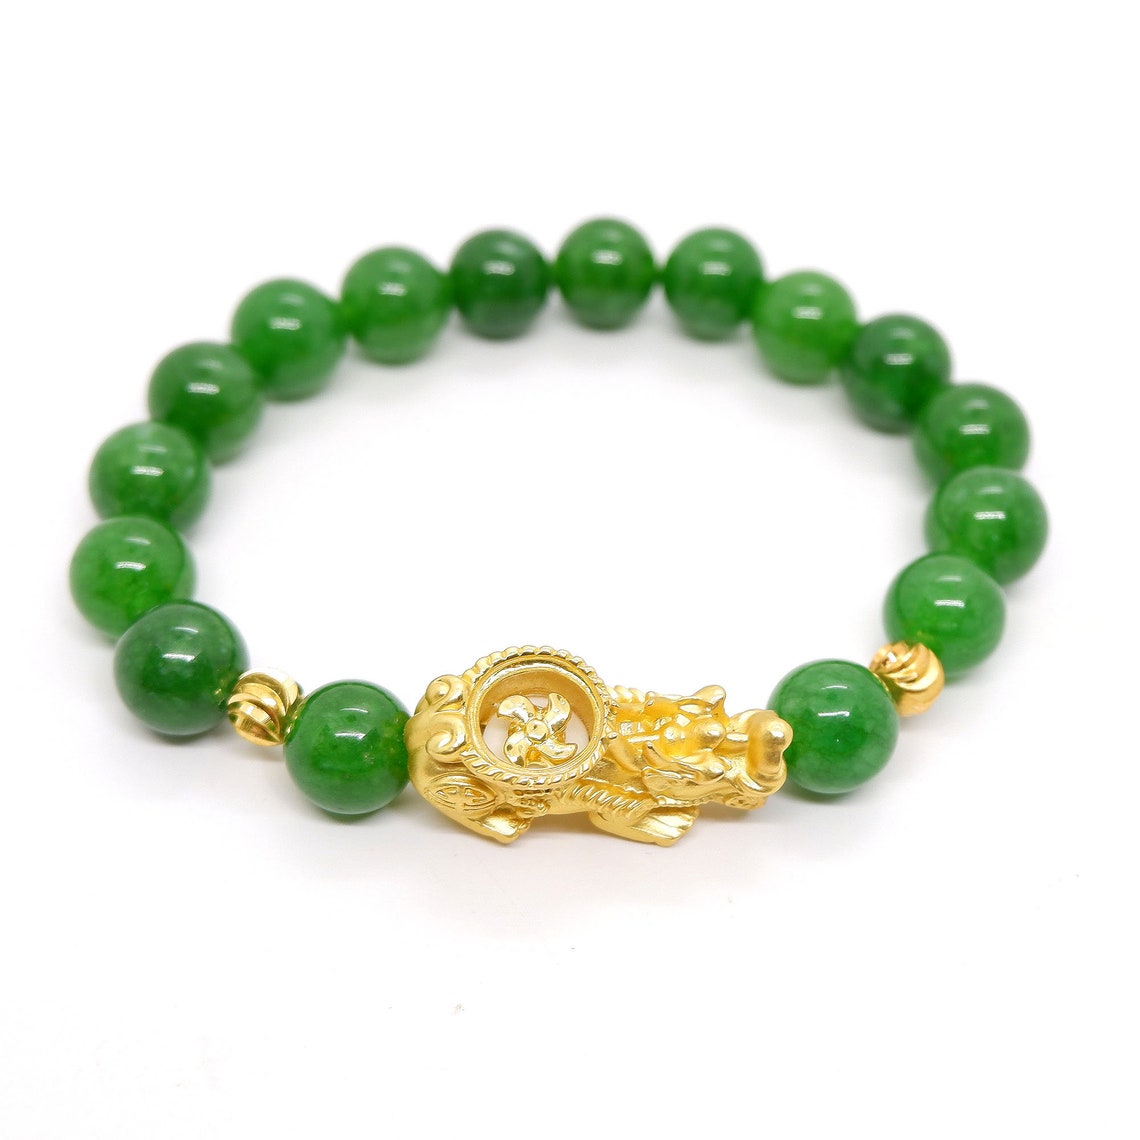 Green Jade beads Bracelet with Chinese Gold Plated Feng Shui | Etsy